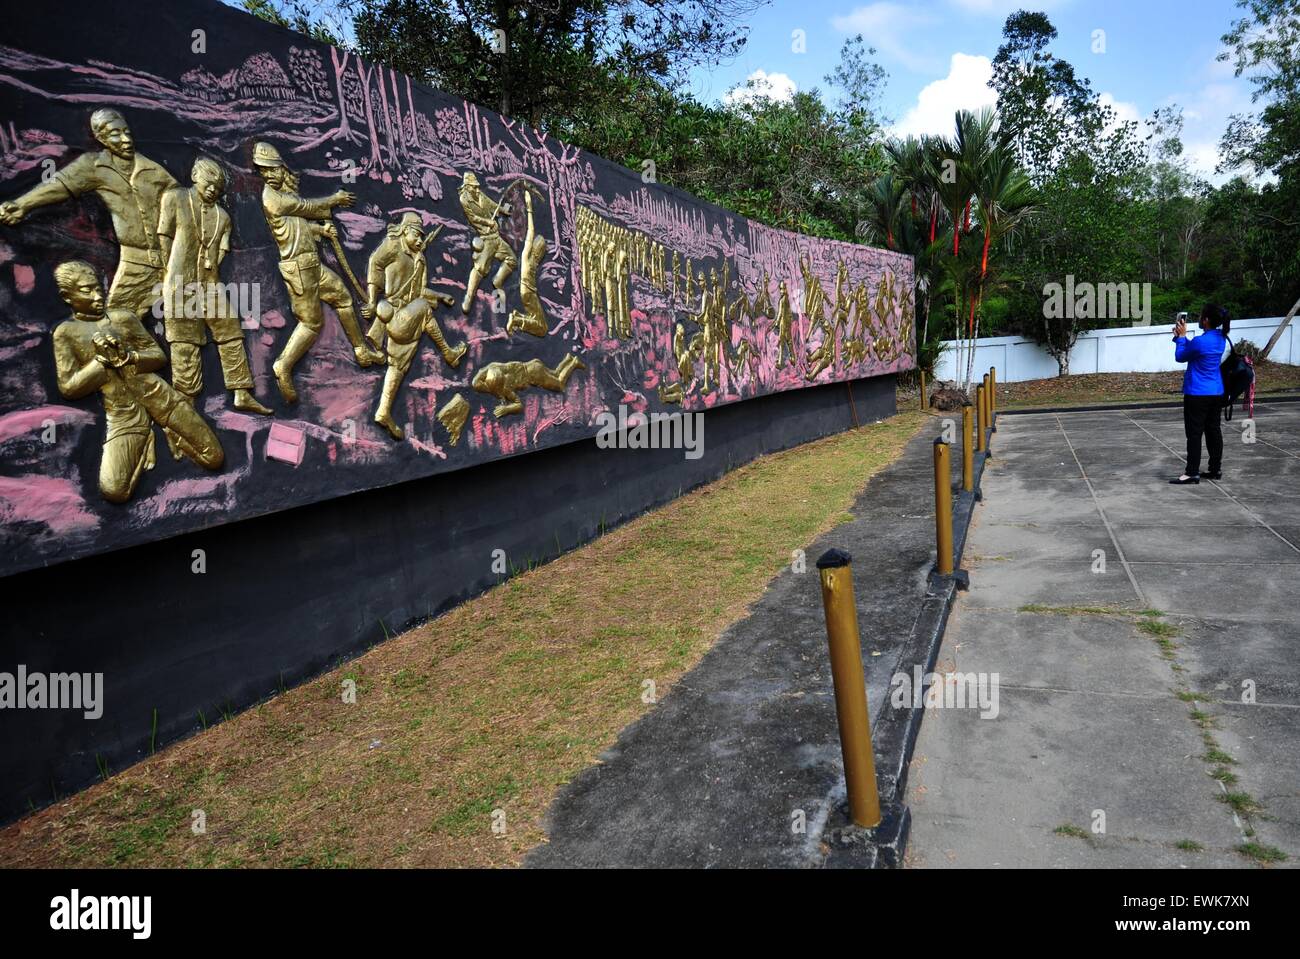 Pontianak, Indonesia. 28th June, 2015. An Indonesian college student takes photos in front of memorial graphics at the Juang Mandor Monument after a memorial ceremony in Mandor town, near Pontianak, capital of West Kalimantan Province, Indonesia, June 28, 2015. People commemorate the massacre of local residents in West Kalimantan by Japanese troops in WWII on Sunday. © Zulkarnain/Xinhua/Alamy Live News Stock Photo